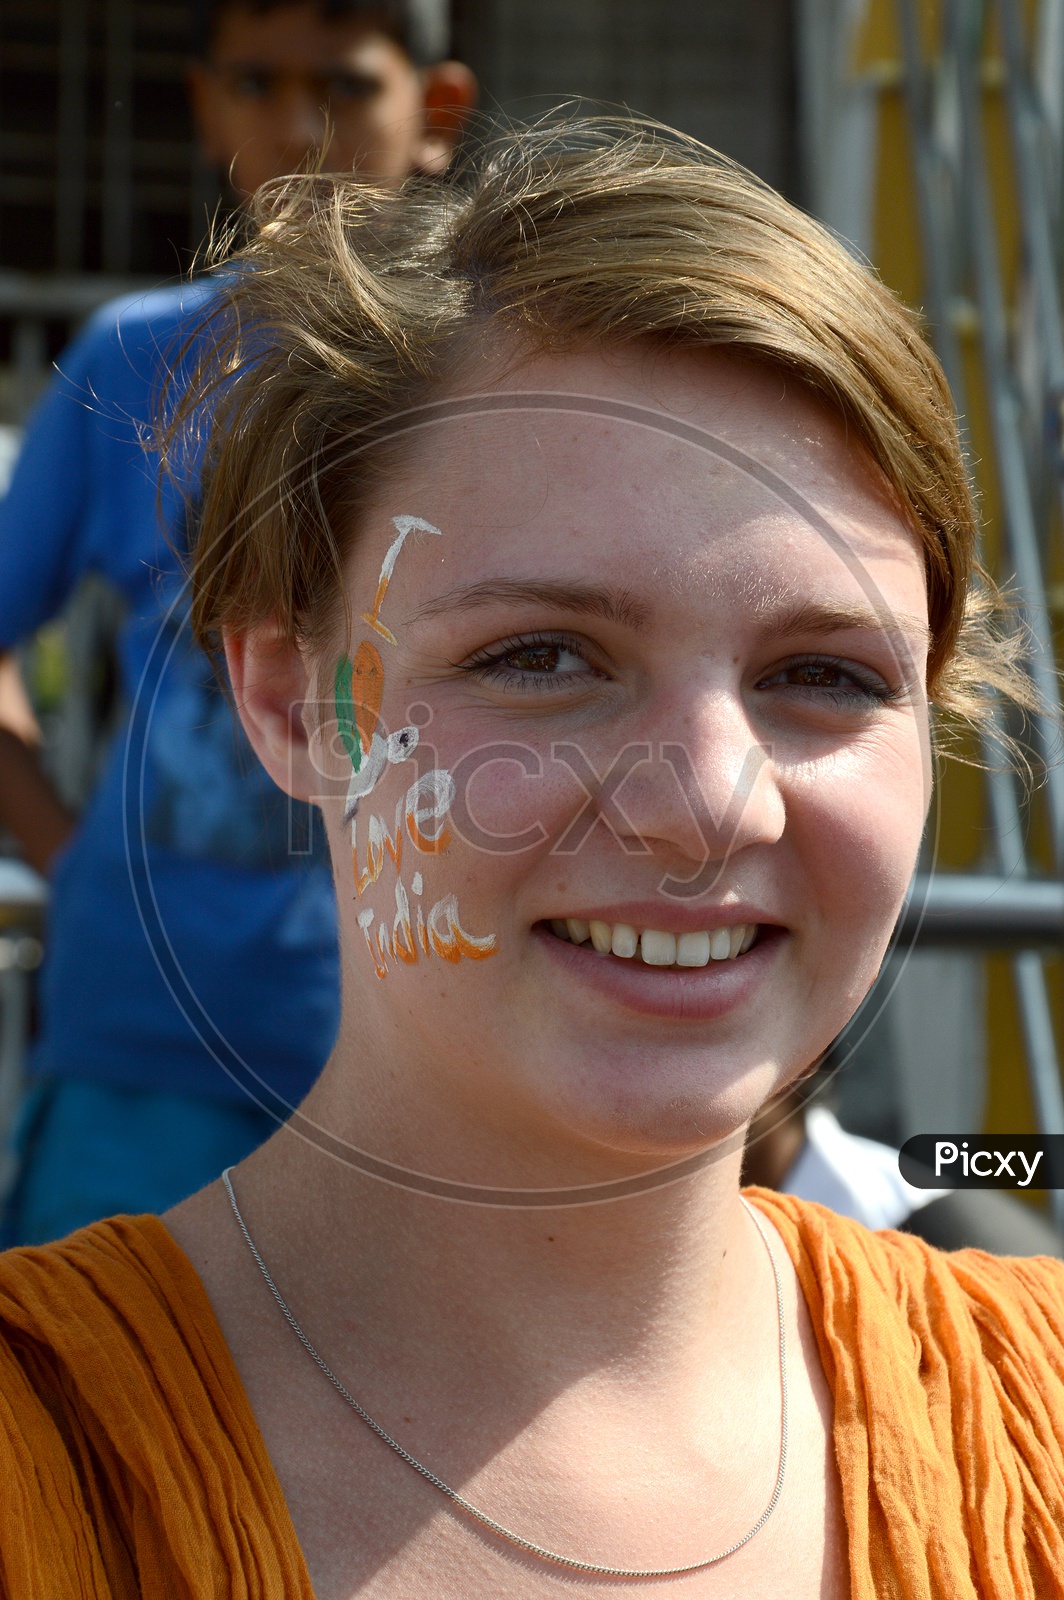 A Foreign Lady  Pasting Indian National Tri-Colors On the Cheek Celebrating Independence Day